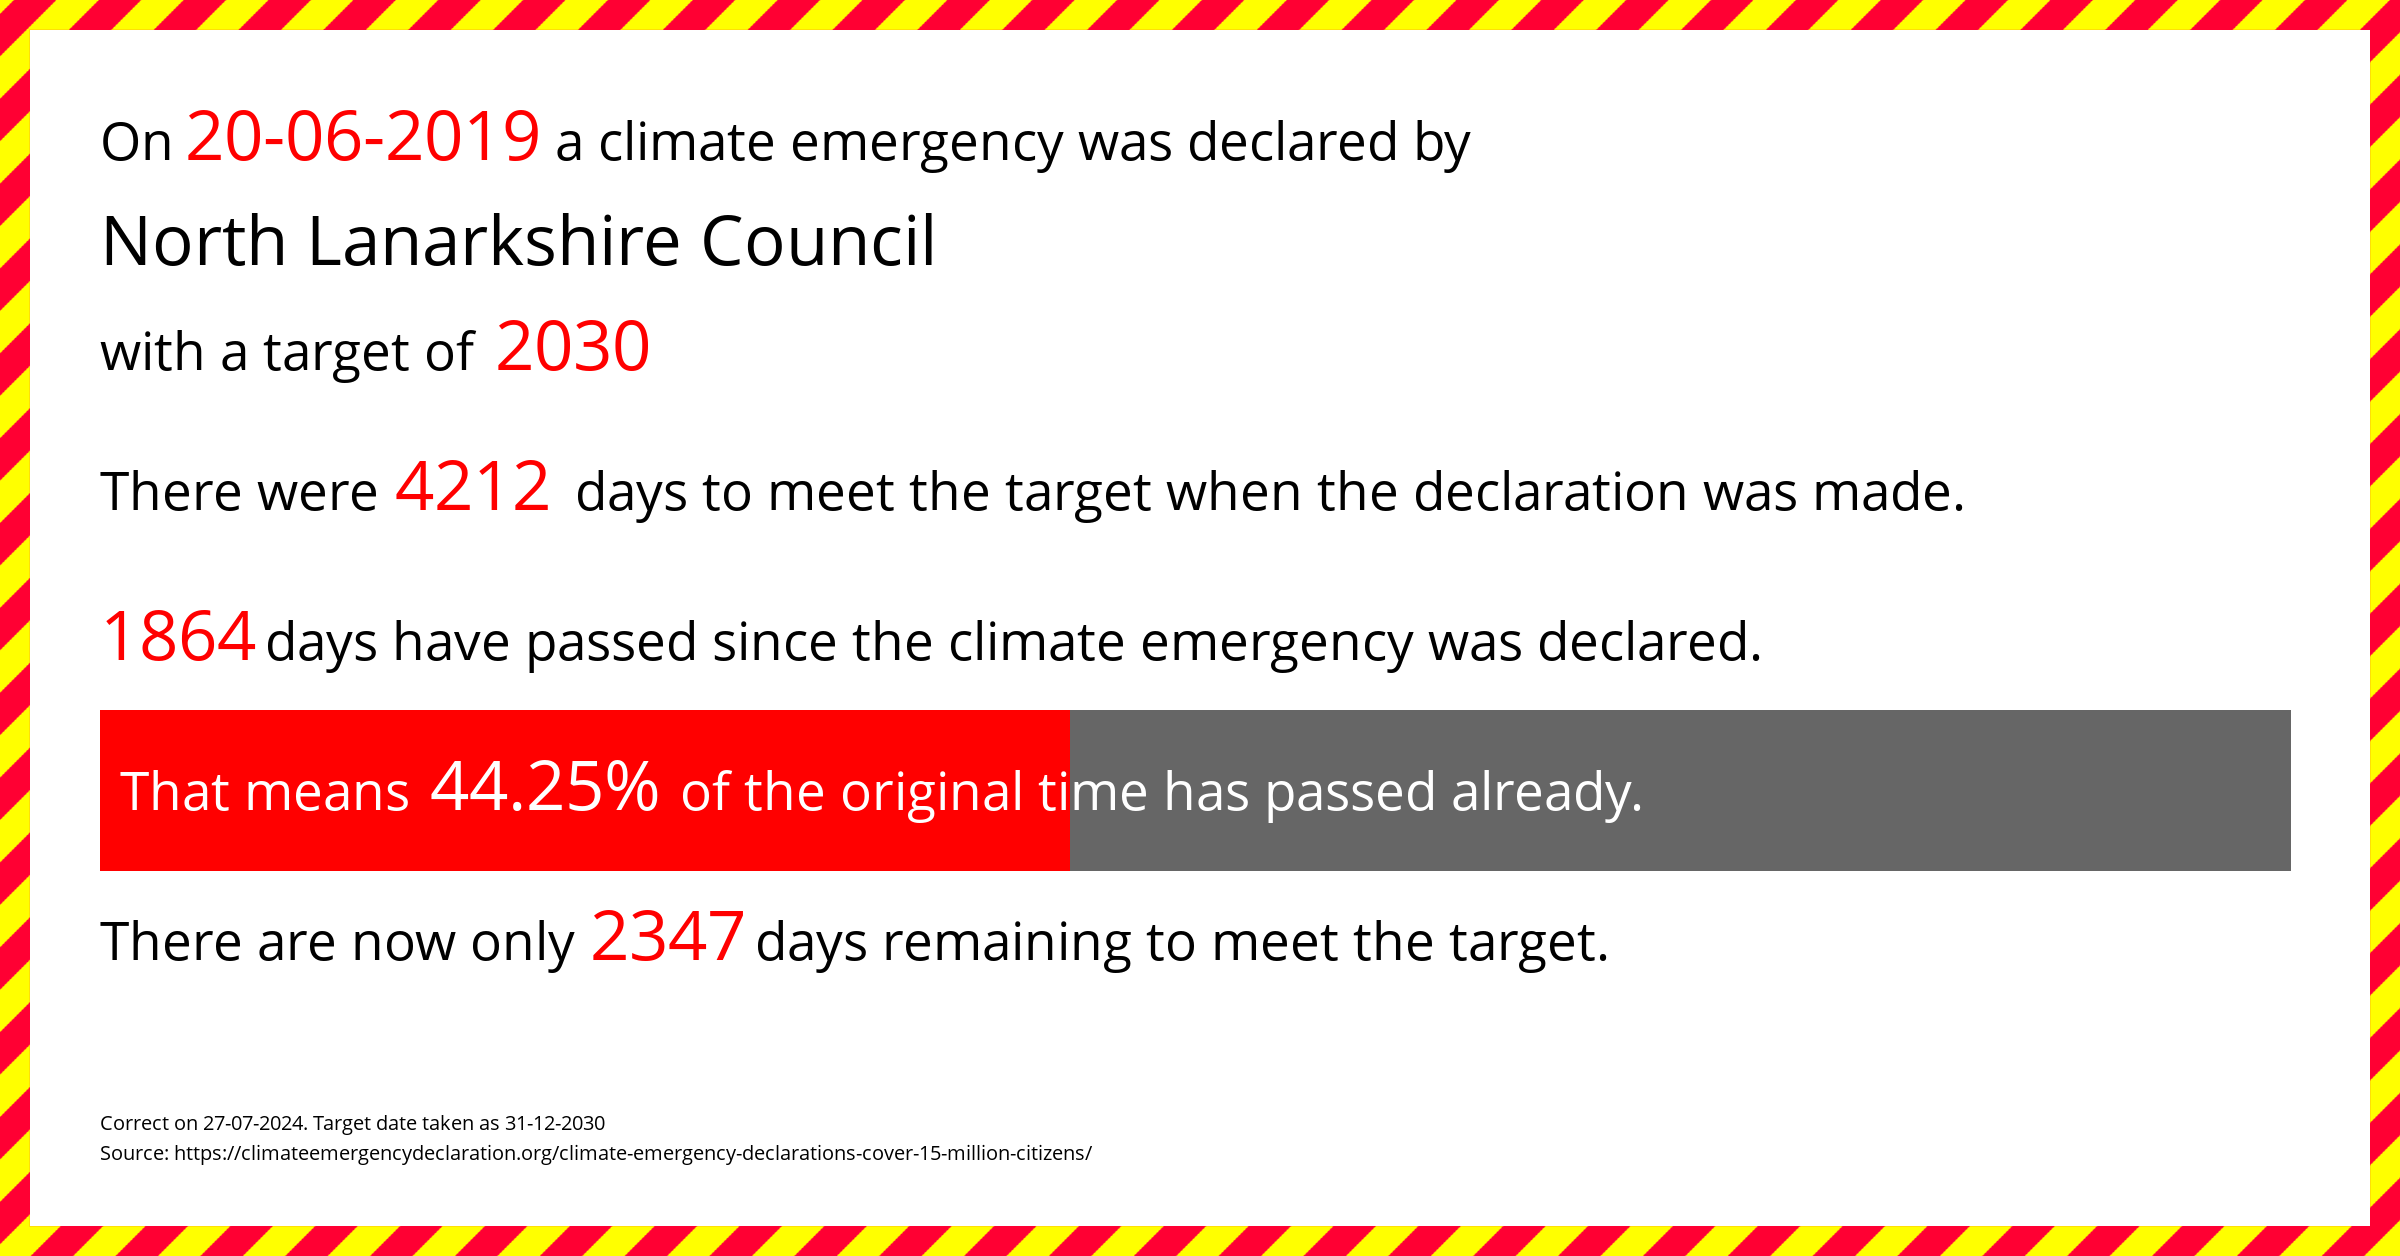 North Lanarkshire Council declared a Climate emergency on Thursday 20th June 2019, with a target of 2030.